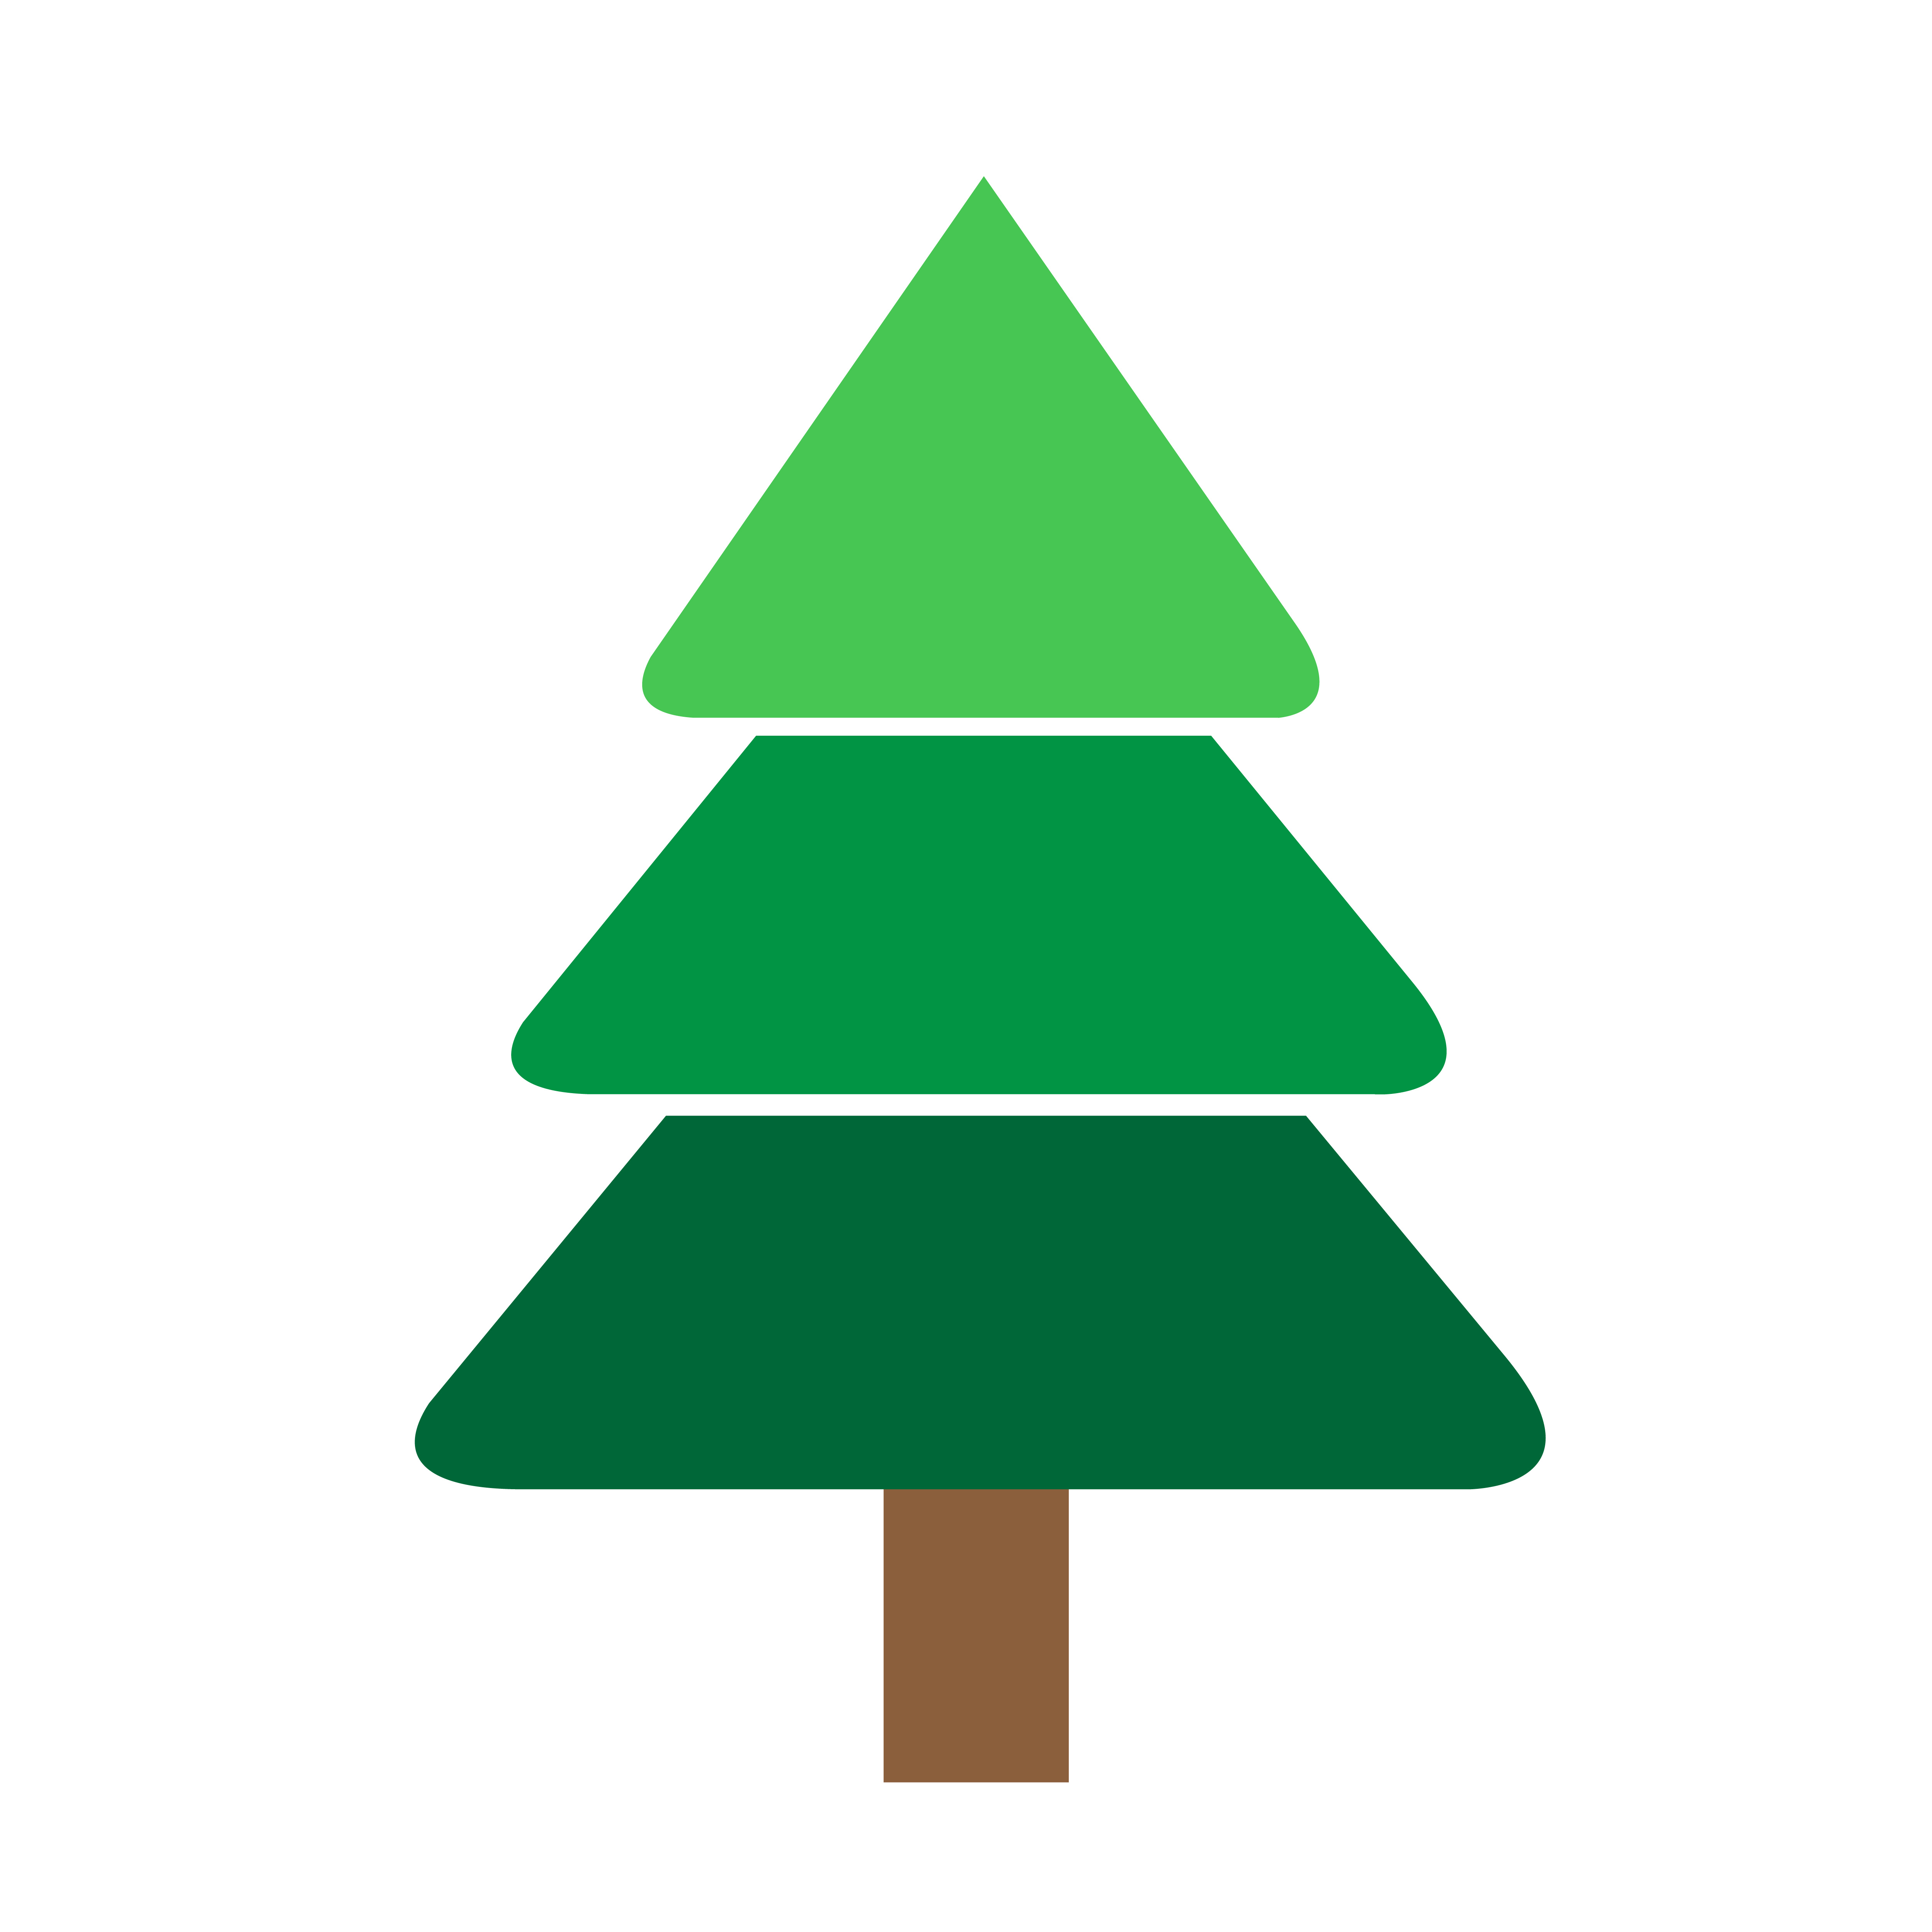 Christmas tree icon - Download Free Vectors, Clipart ...